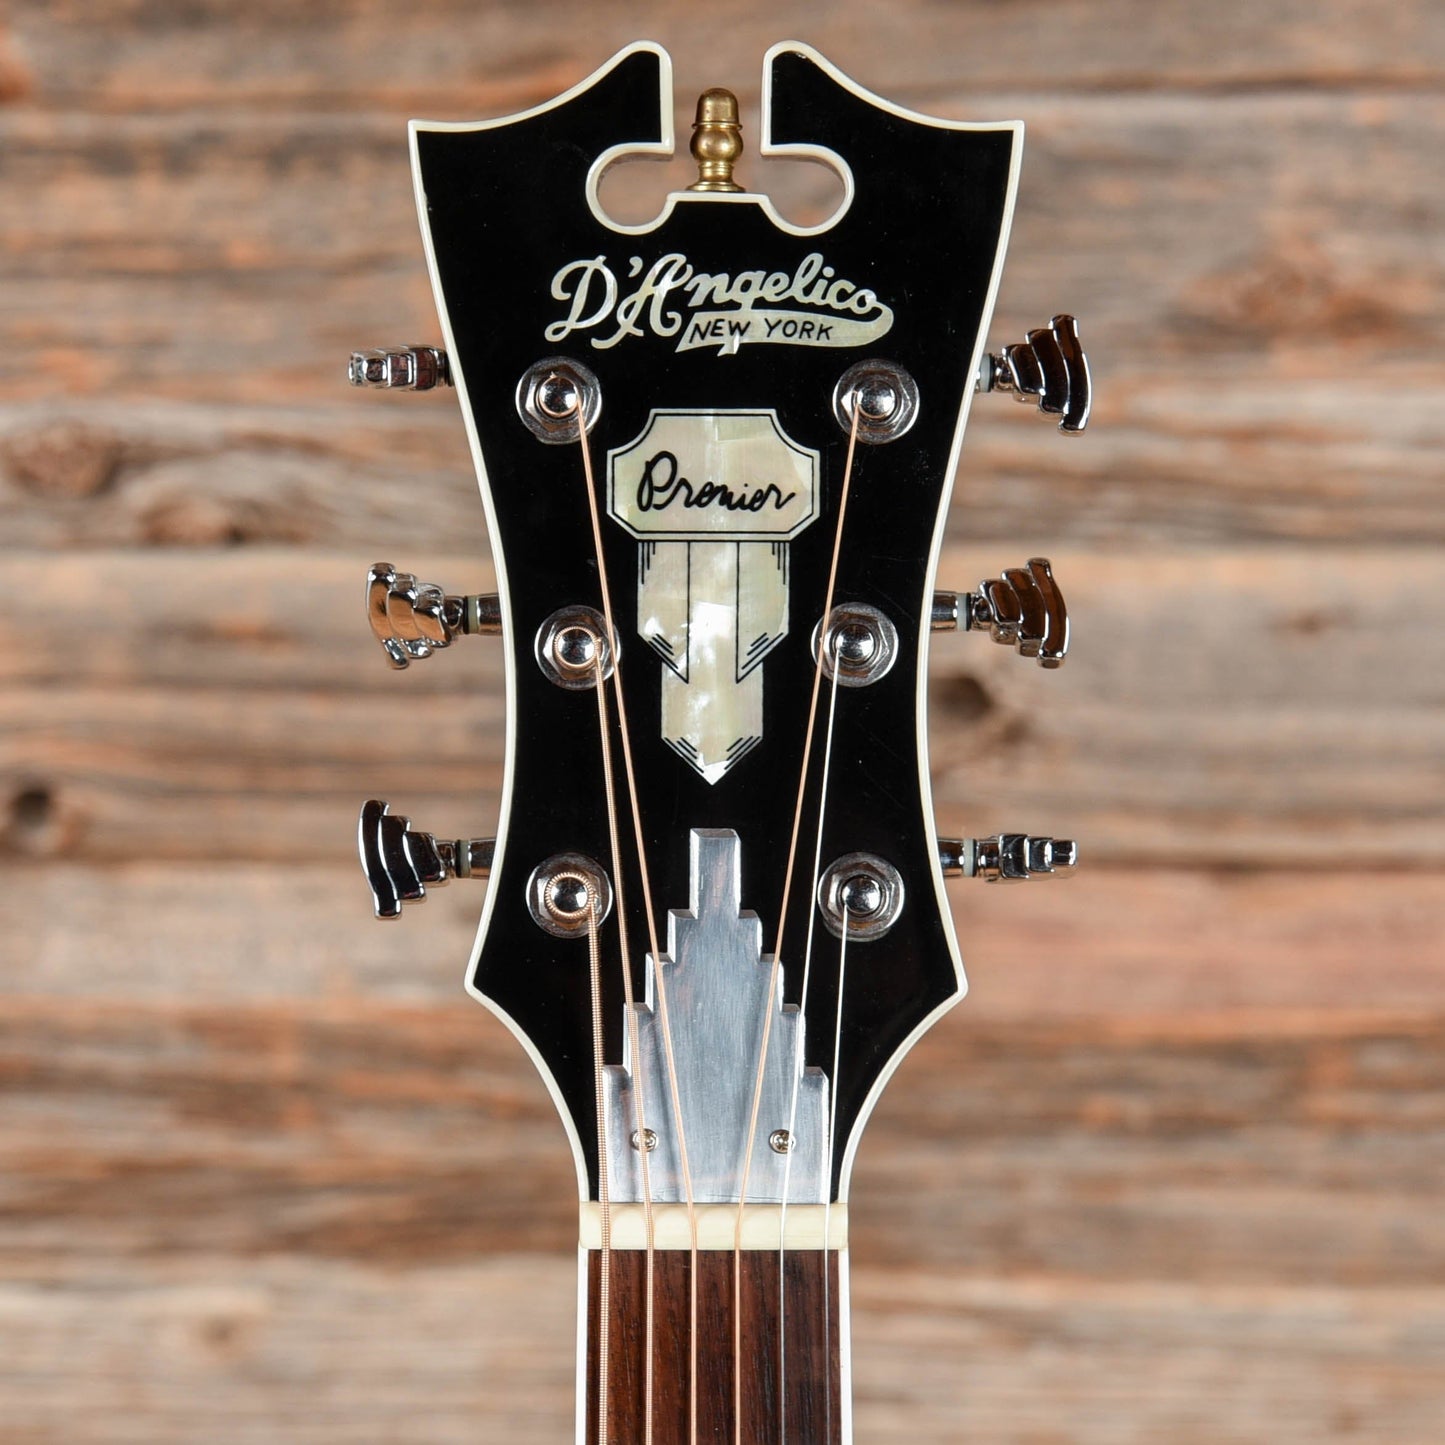 D'Angelico Premier Bowery PSD500 Natural 2016 Acoustic Guitars / Dreadnought